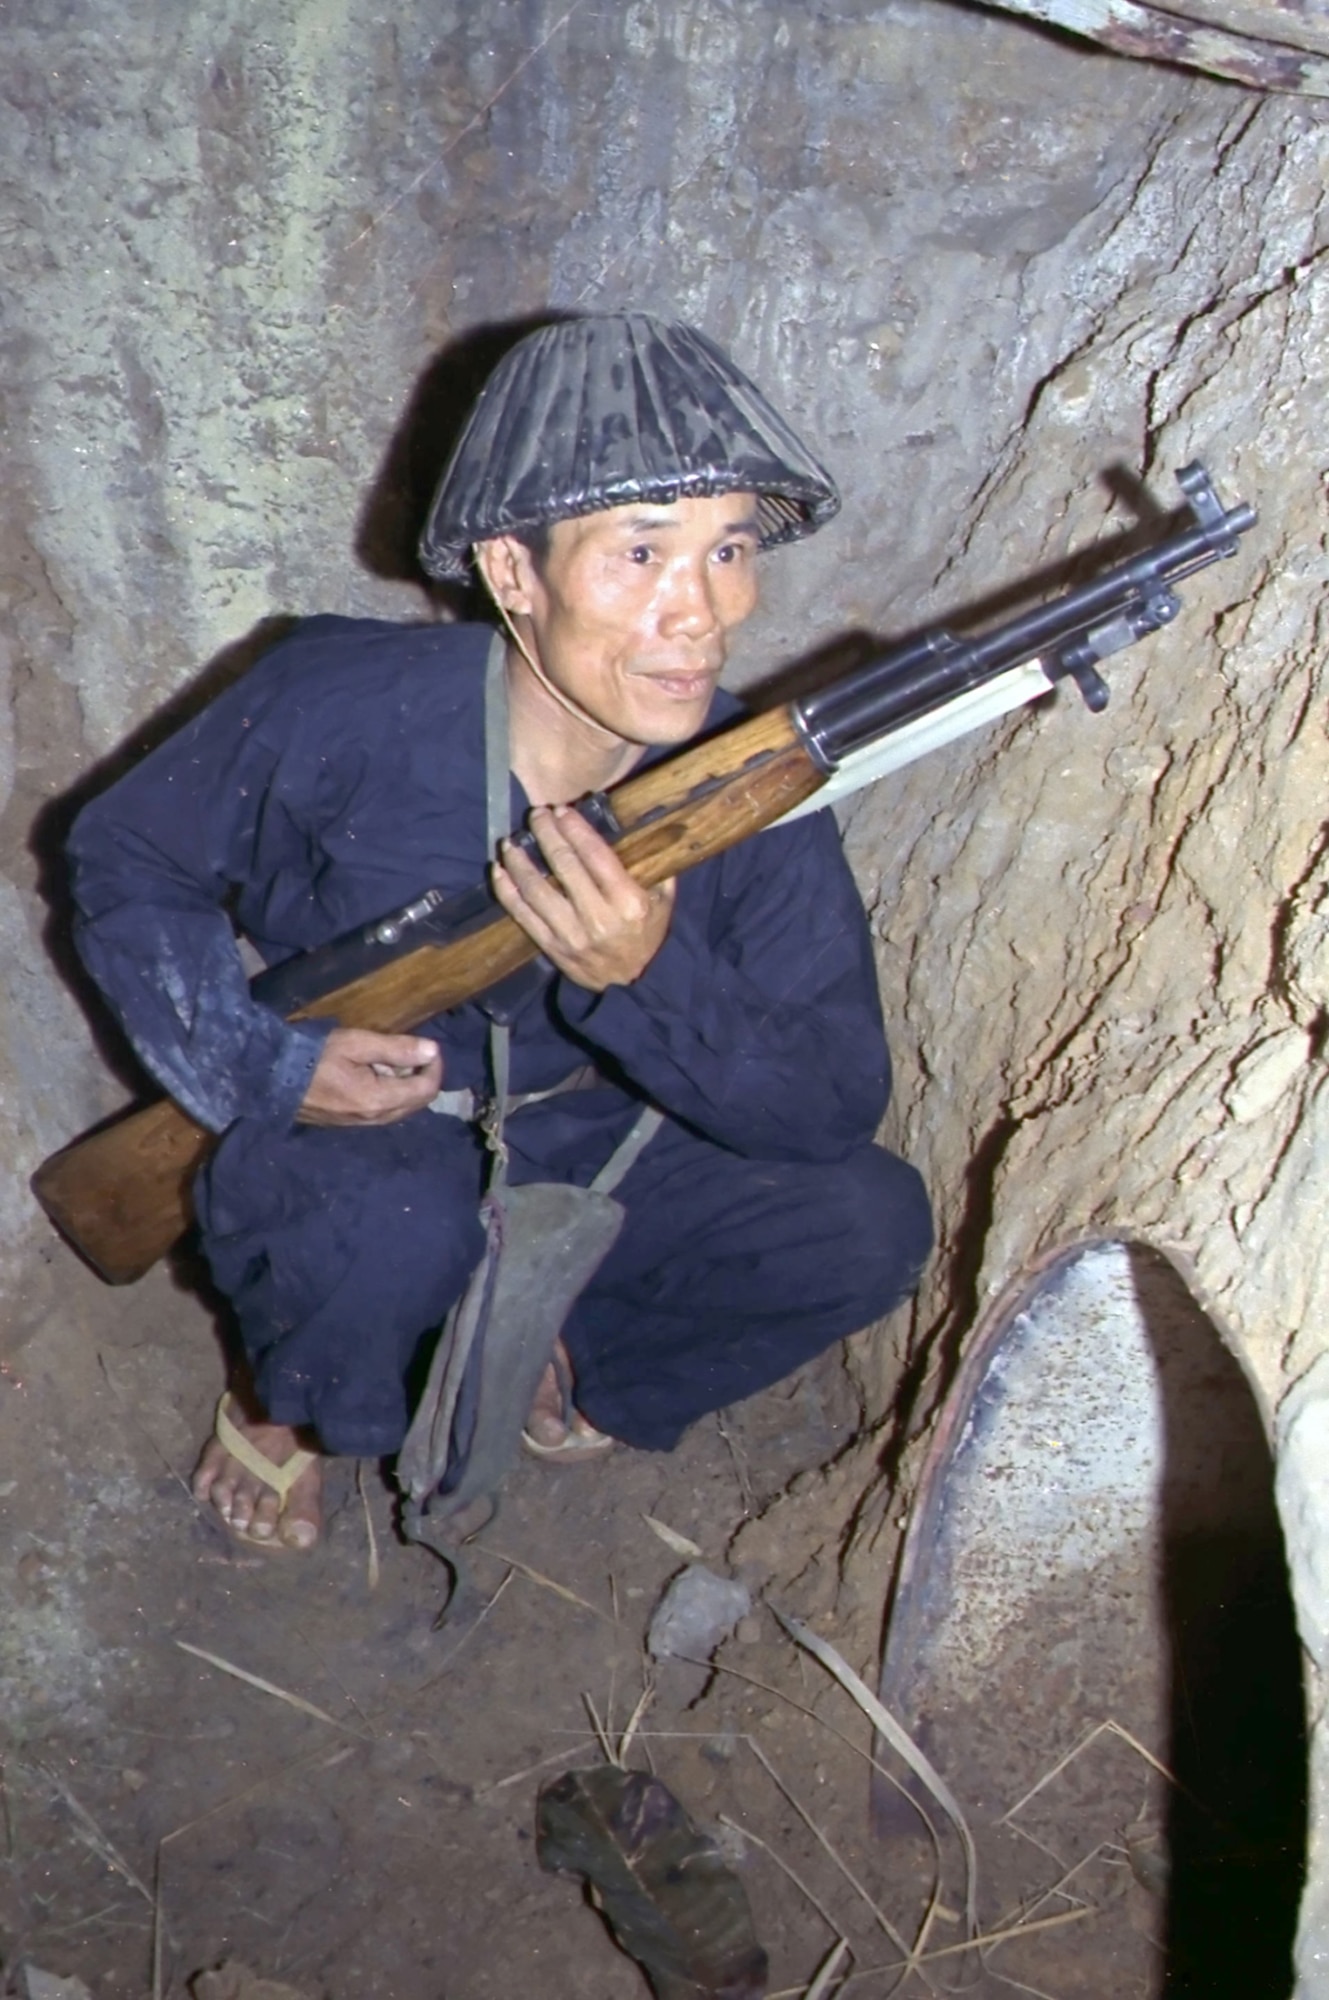 Viet Cong insurgent crouching in a bunker holding an SKS rifle. (U.S. Air Force photo).